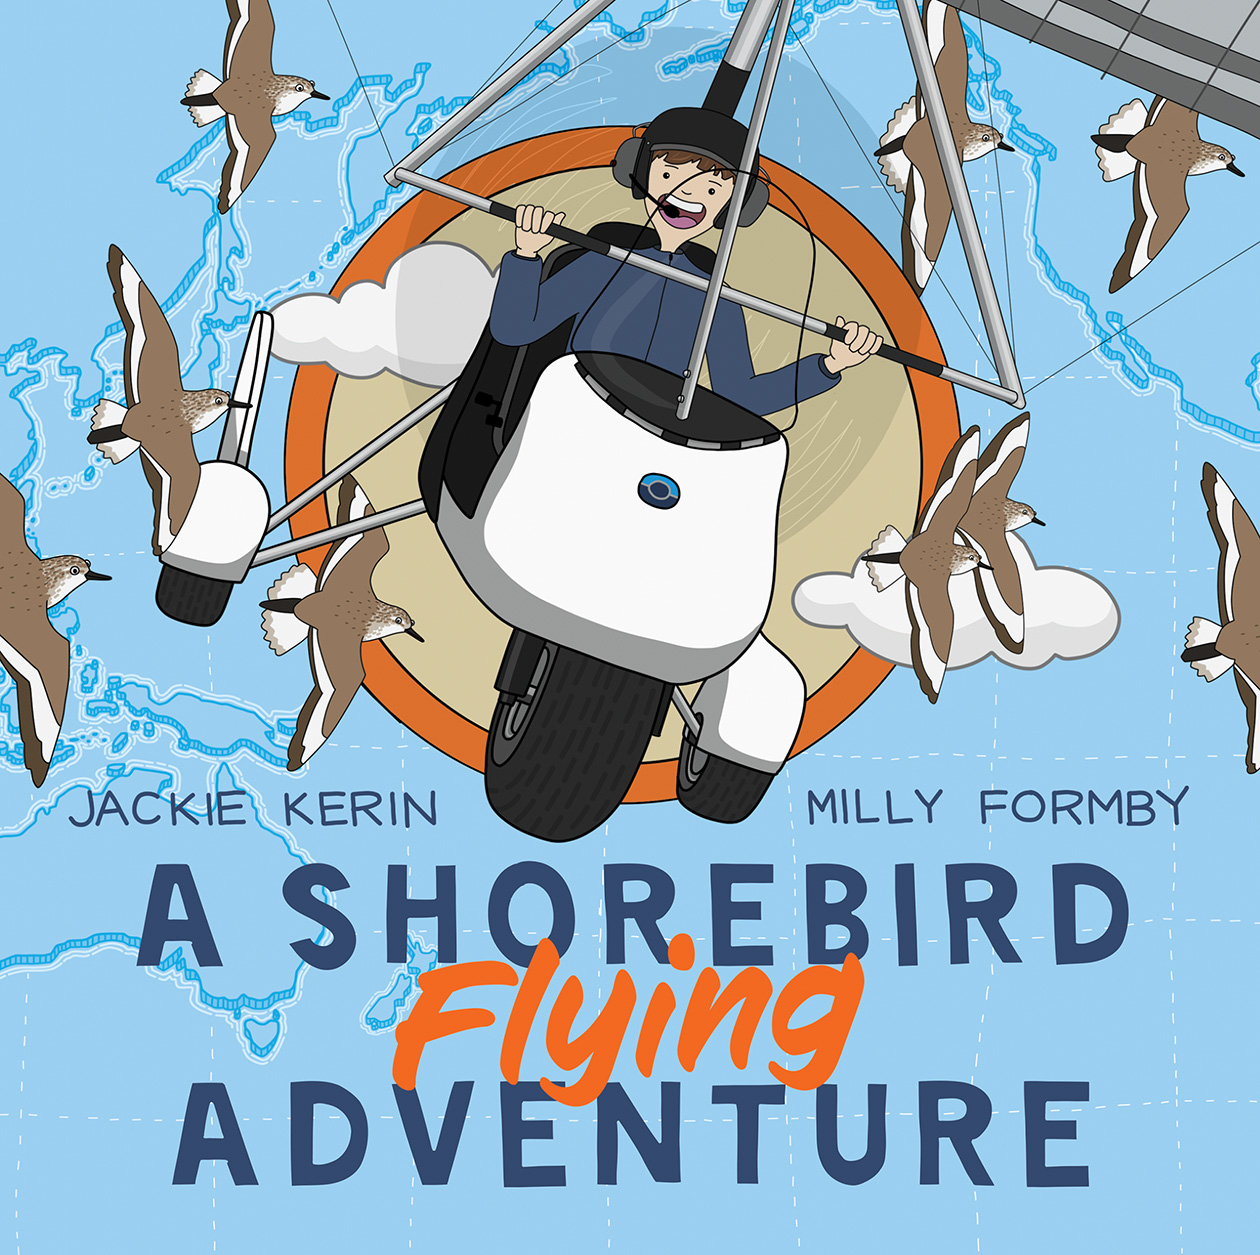 Cover of 'A Shorebird Flying Adventure', featuring an illustration of Milly on her microlight aircraft surrounded by flying birds.